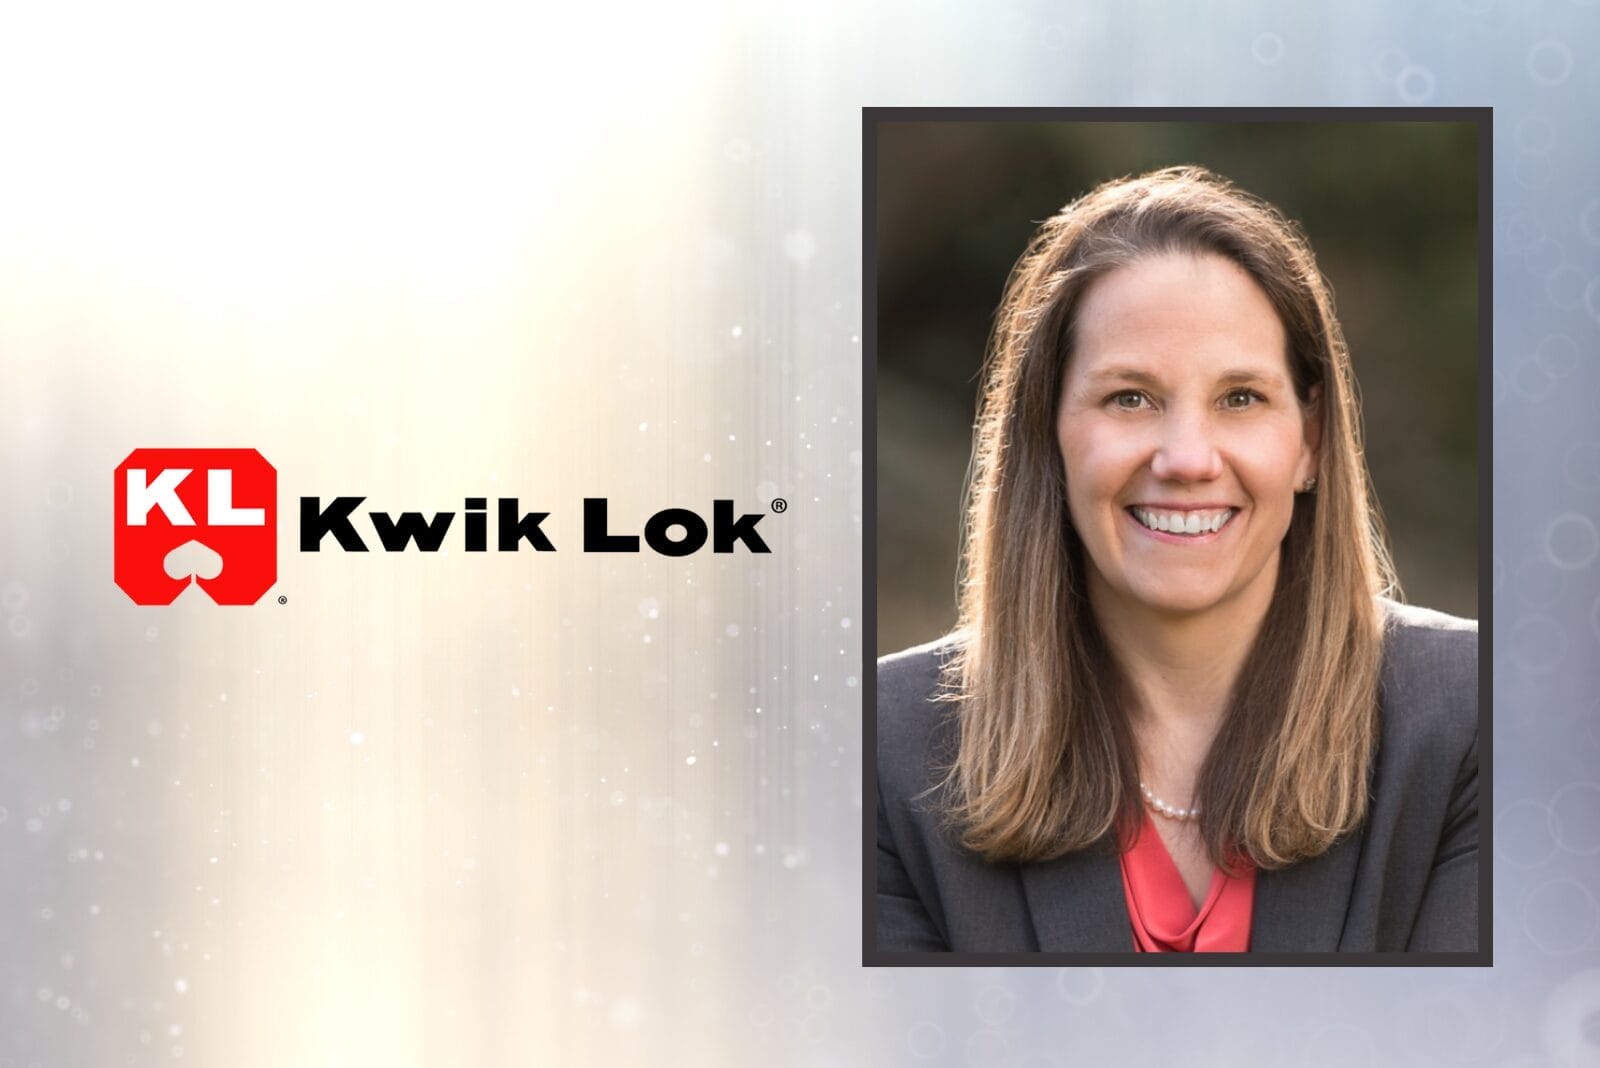 Kwik Lok logo and Sheila Stafford, CEO and co-founder of TeamSense